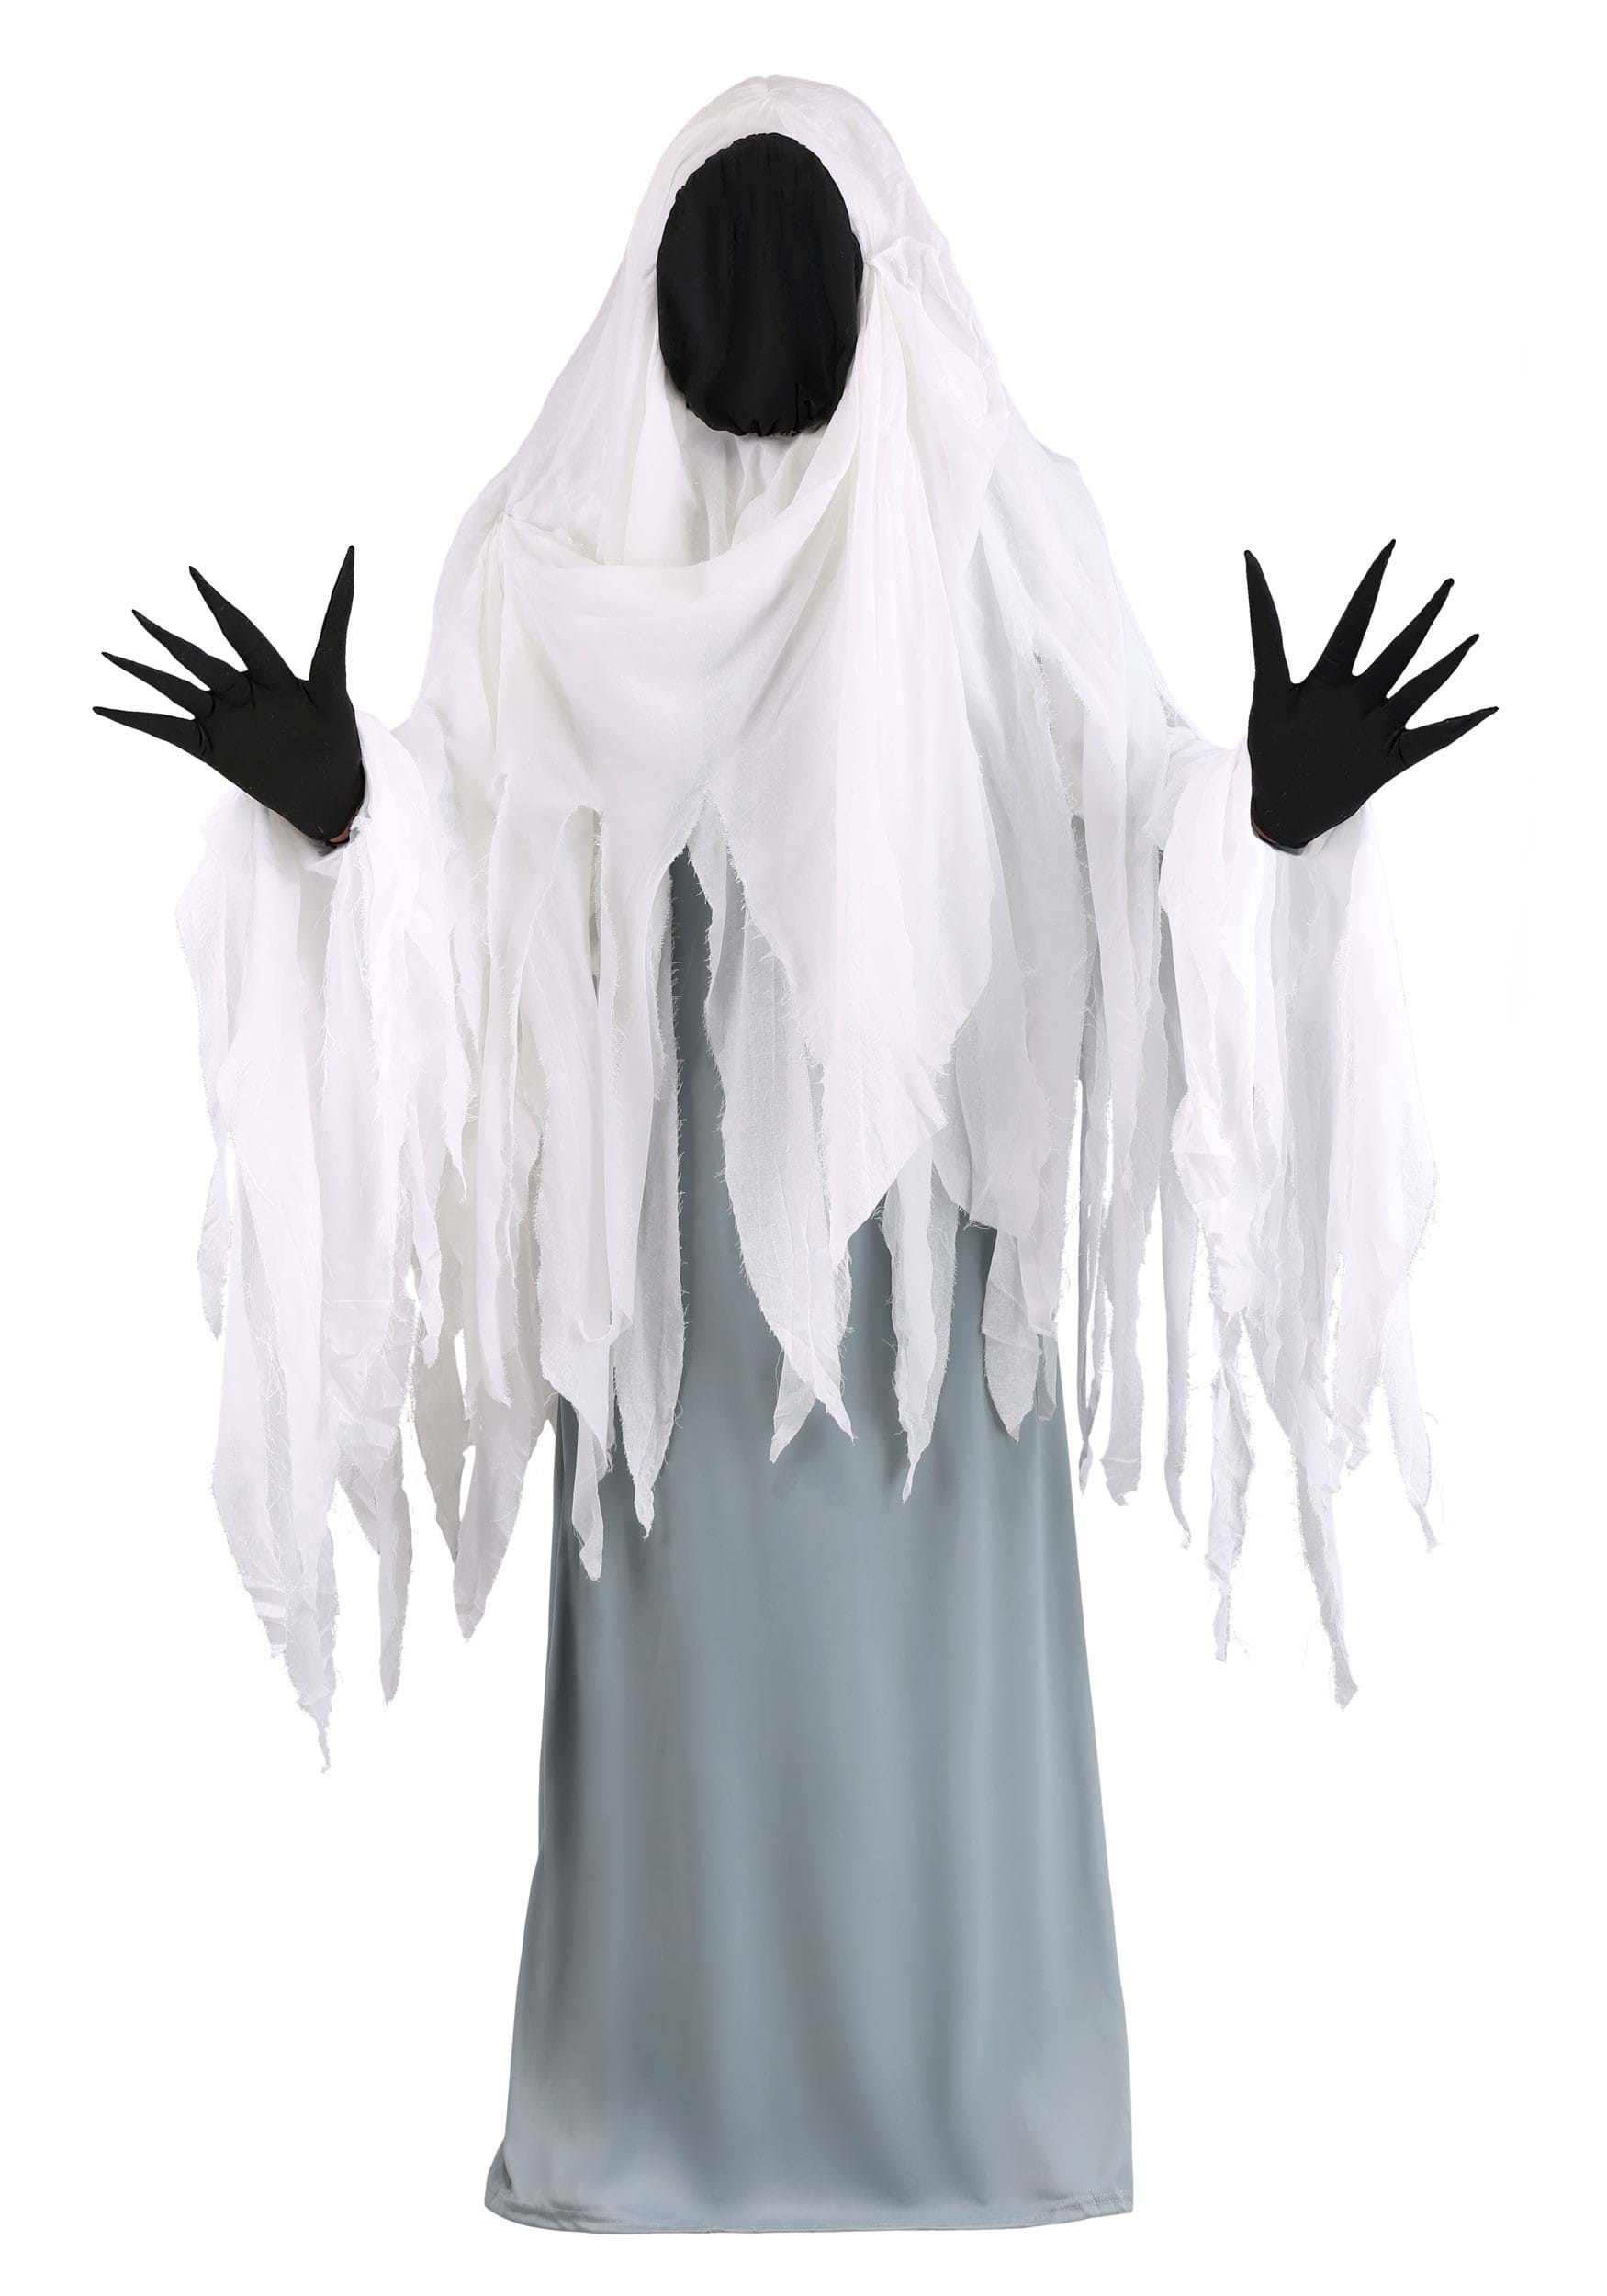 Image of FUN Costumes Spooky Ghost Plus Size Costume for Adults